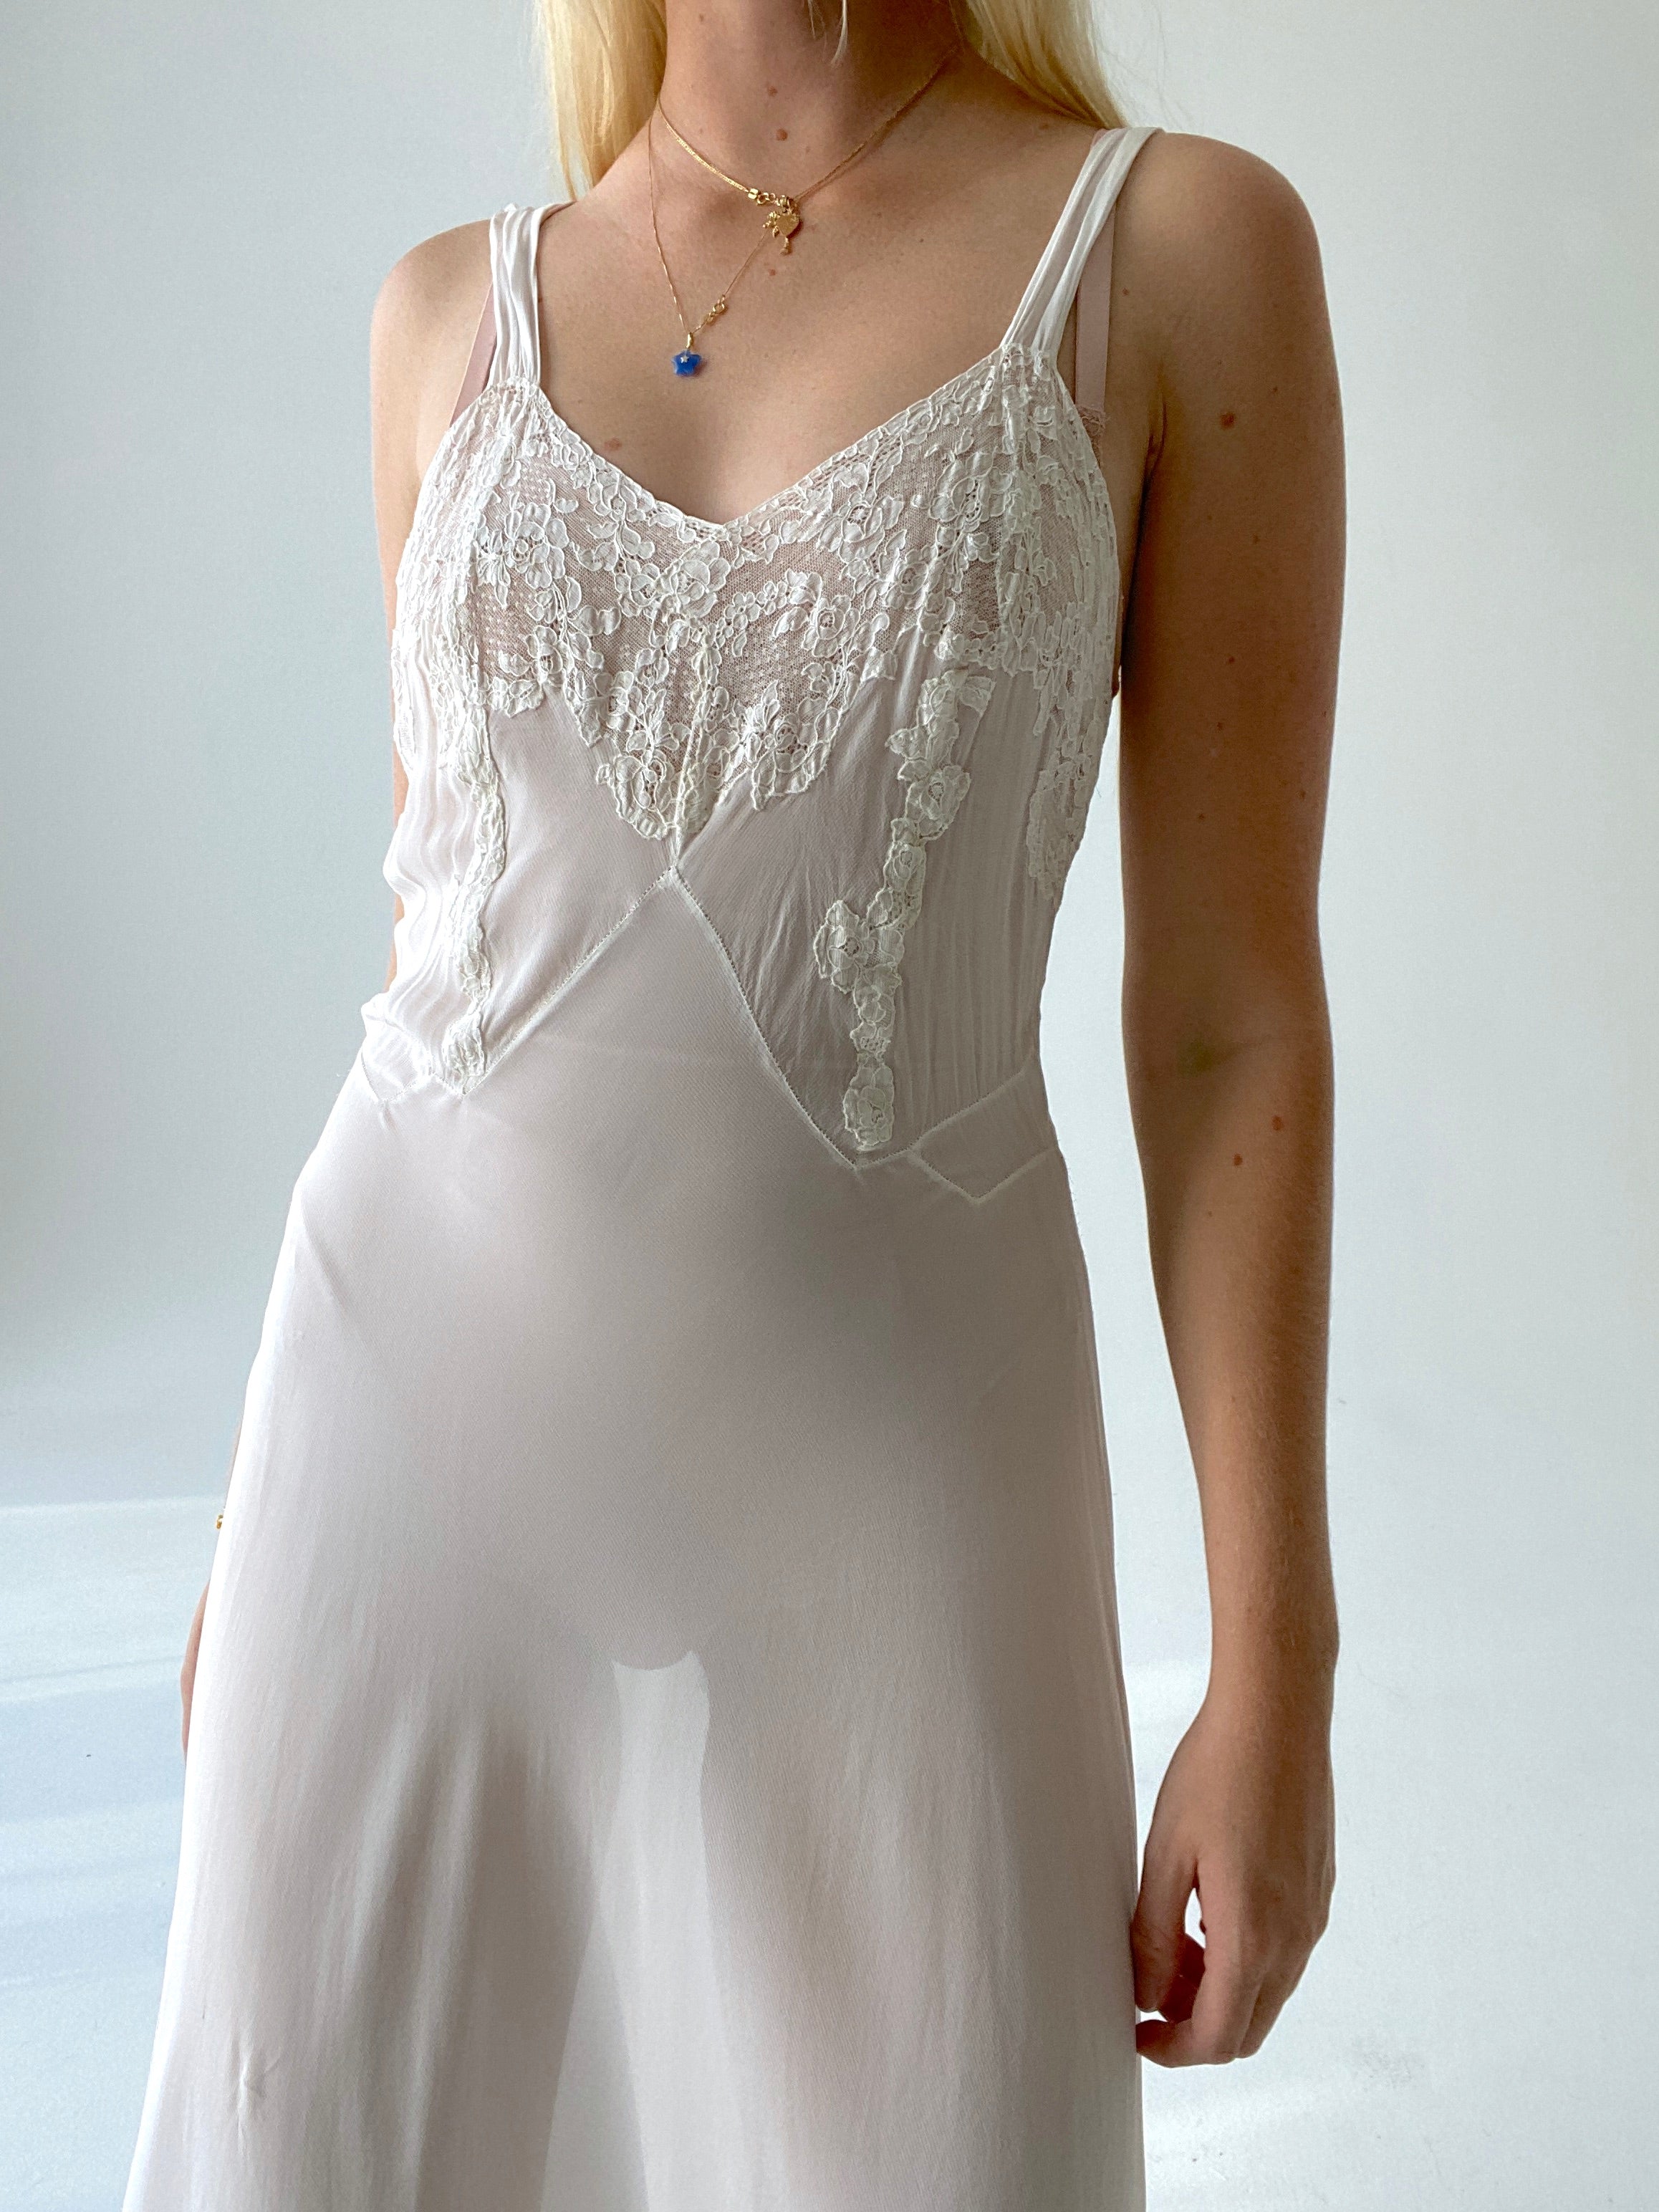 1930's White Crepe Slip with Lace